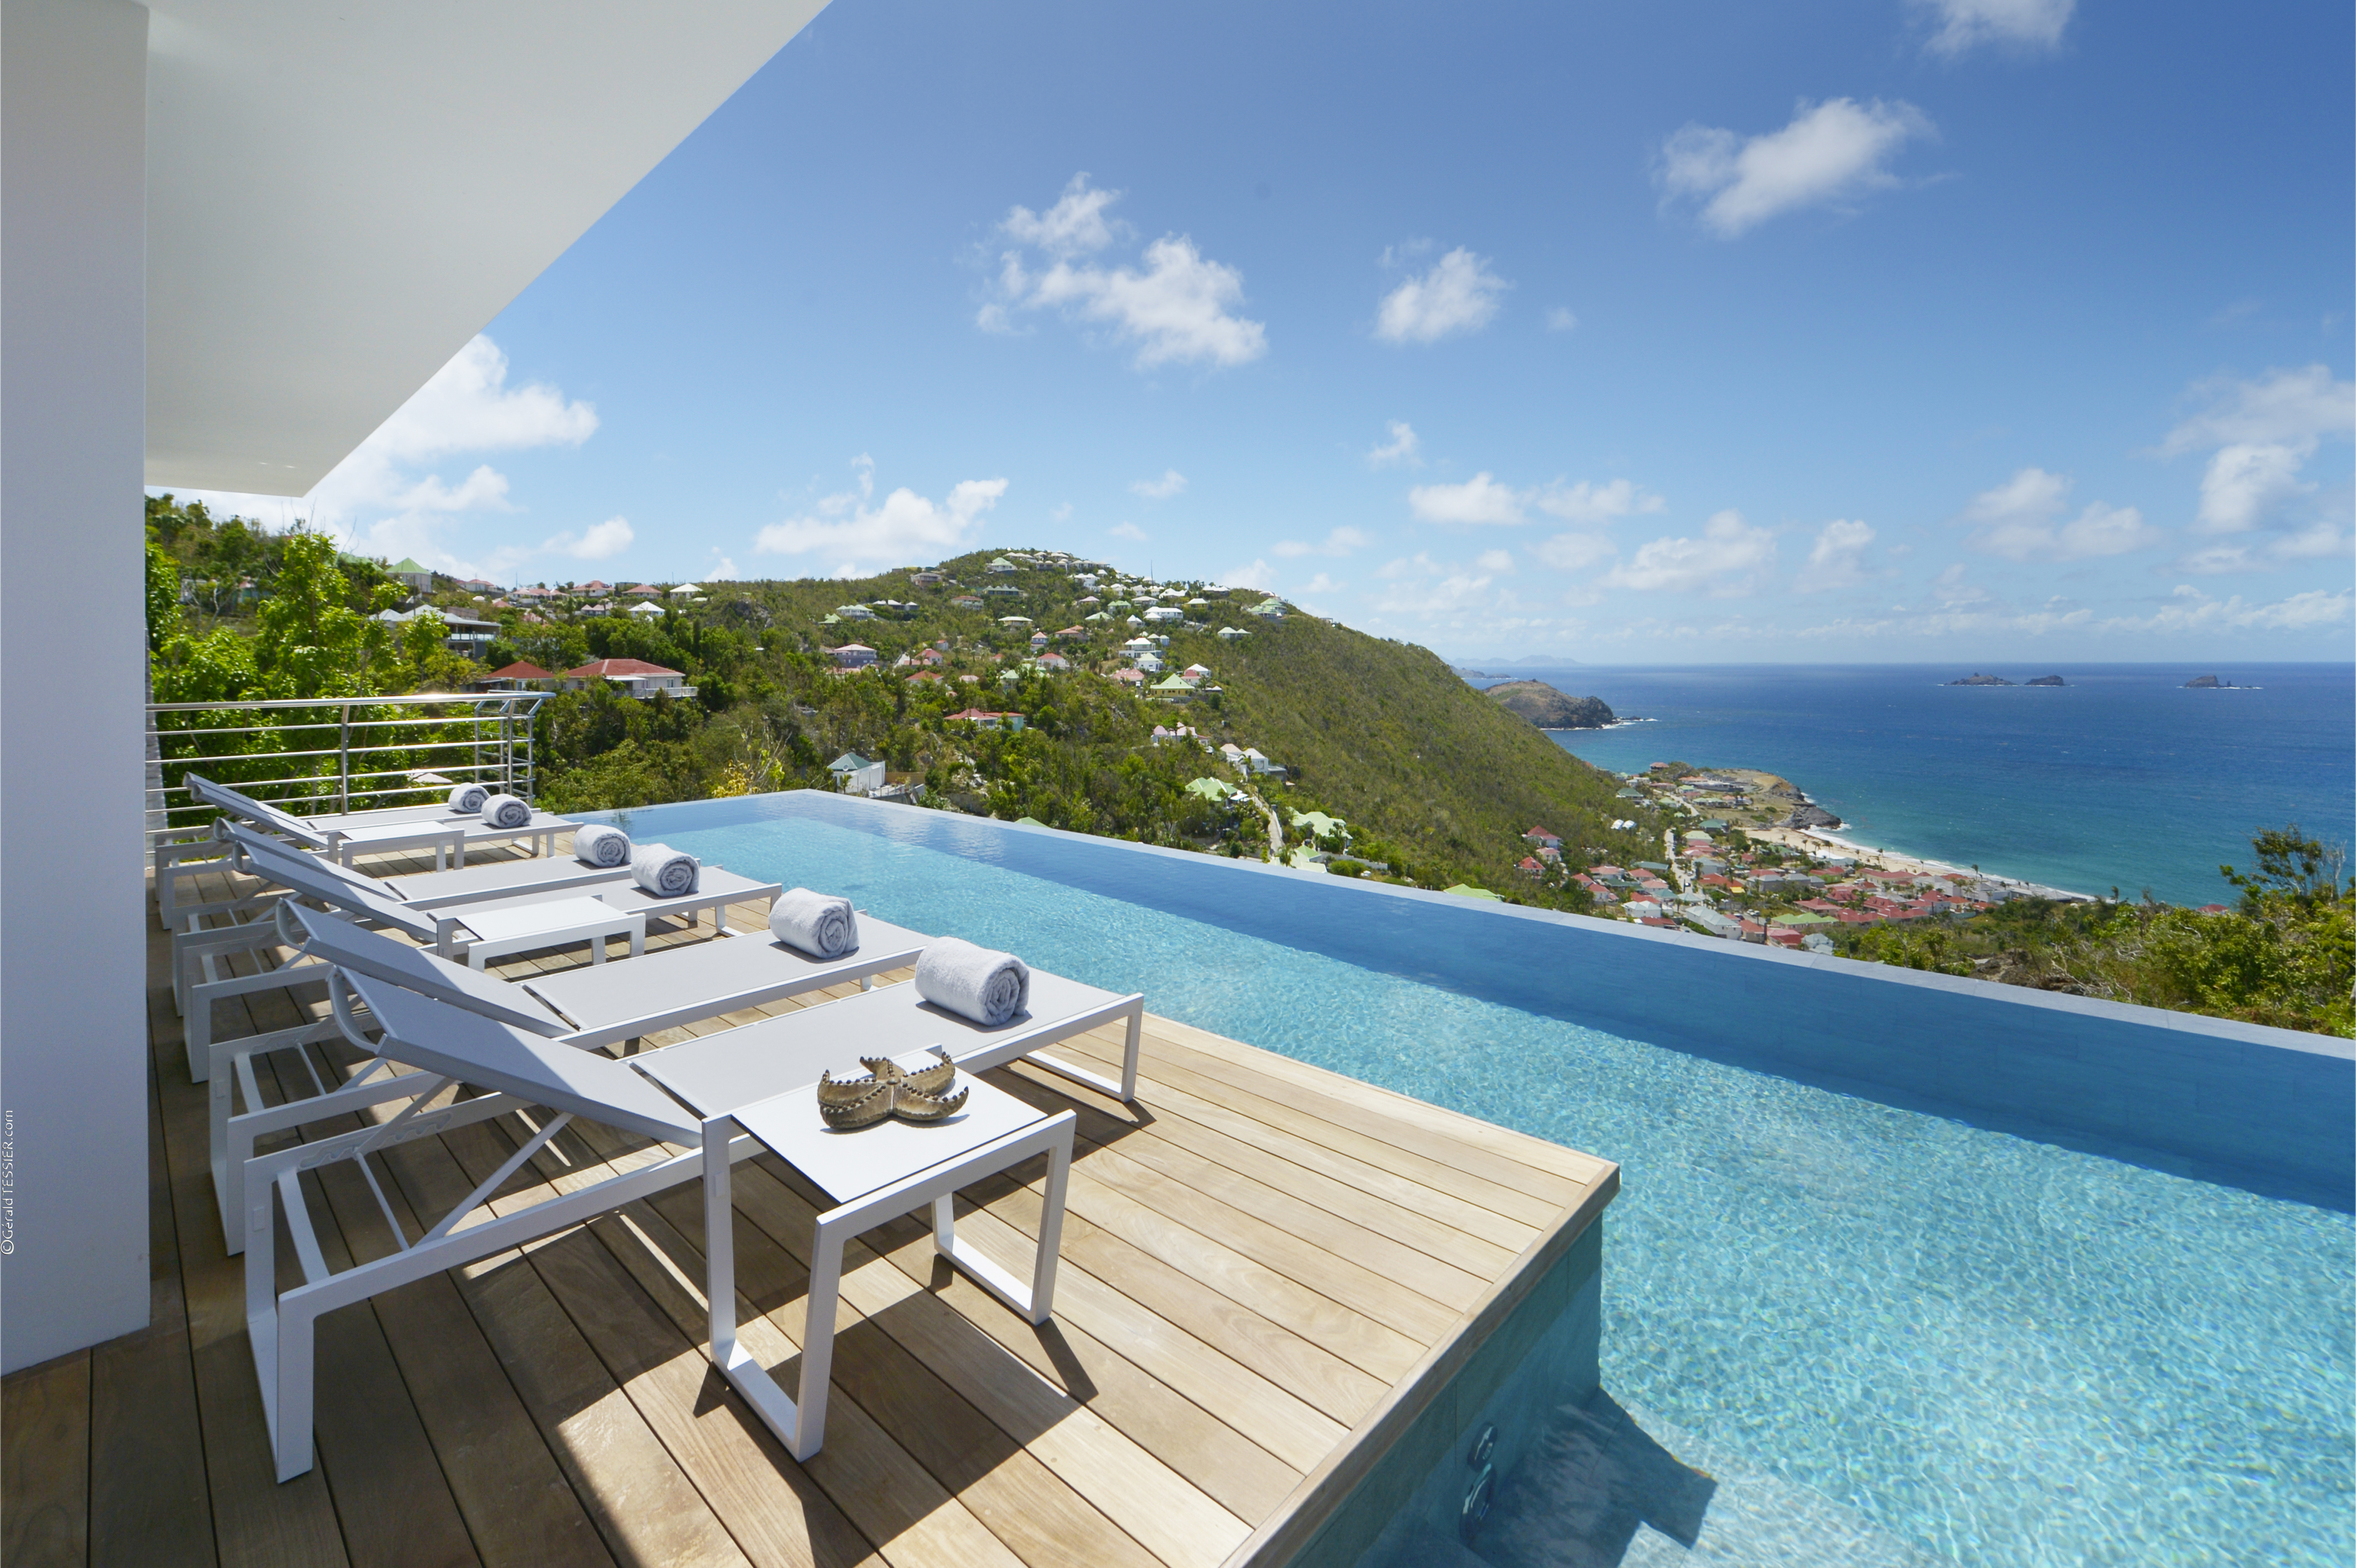 Win a Vacation in St. Barths with WIMCO Villas!